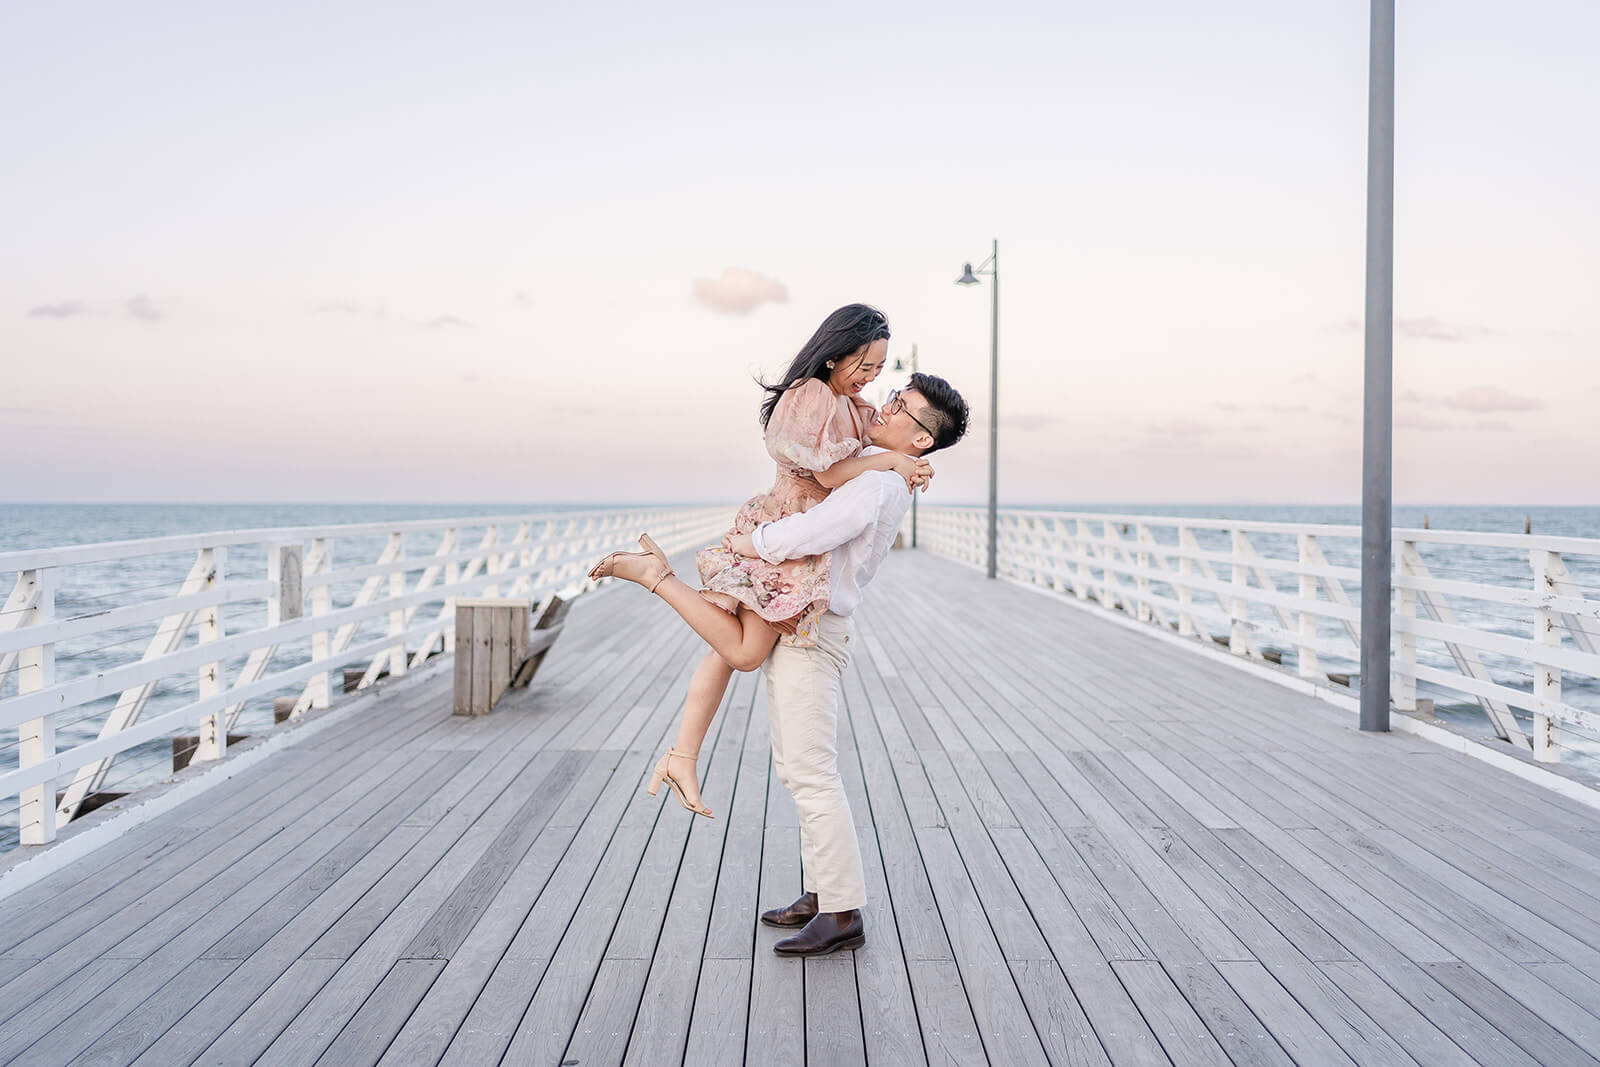 couple lifting on shorncliffe pier having engagement photos done in sandgate sunset hours.